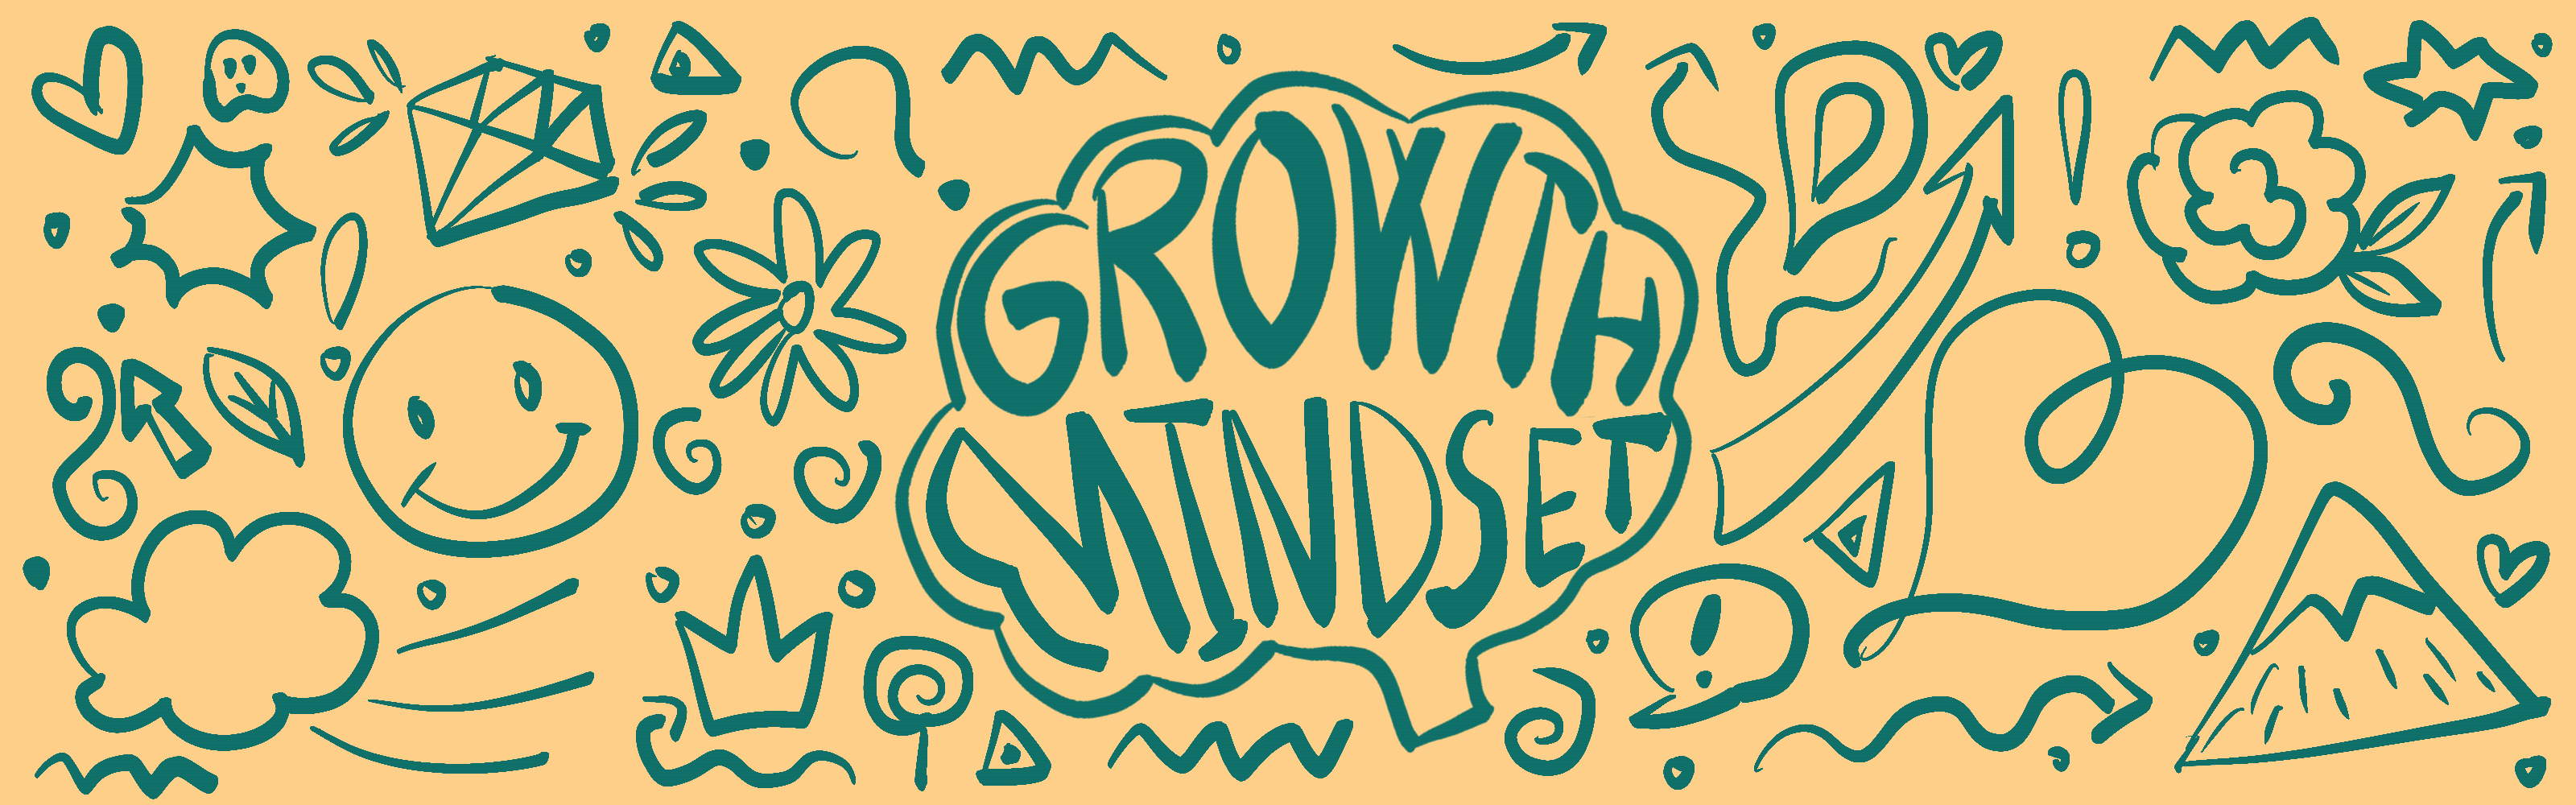 GIF with doodles and texts that say "Growth mindset", "Find joy in reading", and "Take it slow".